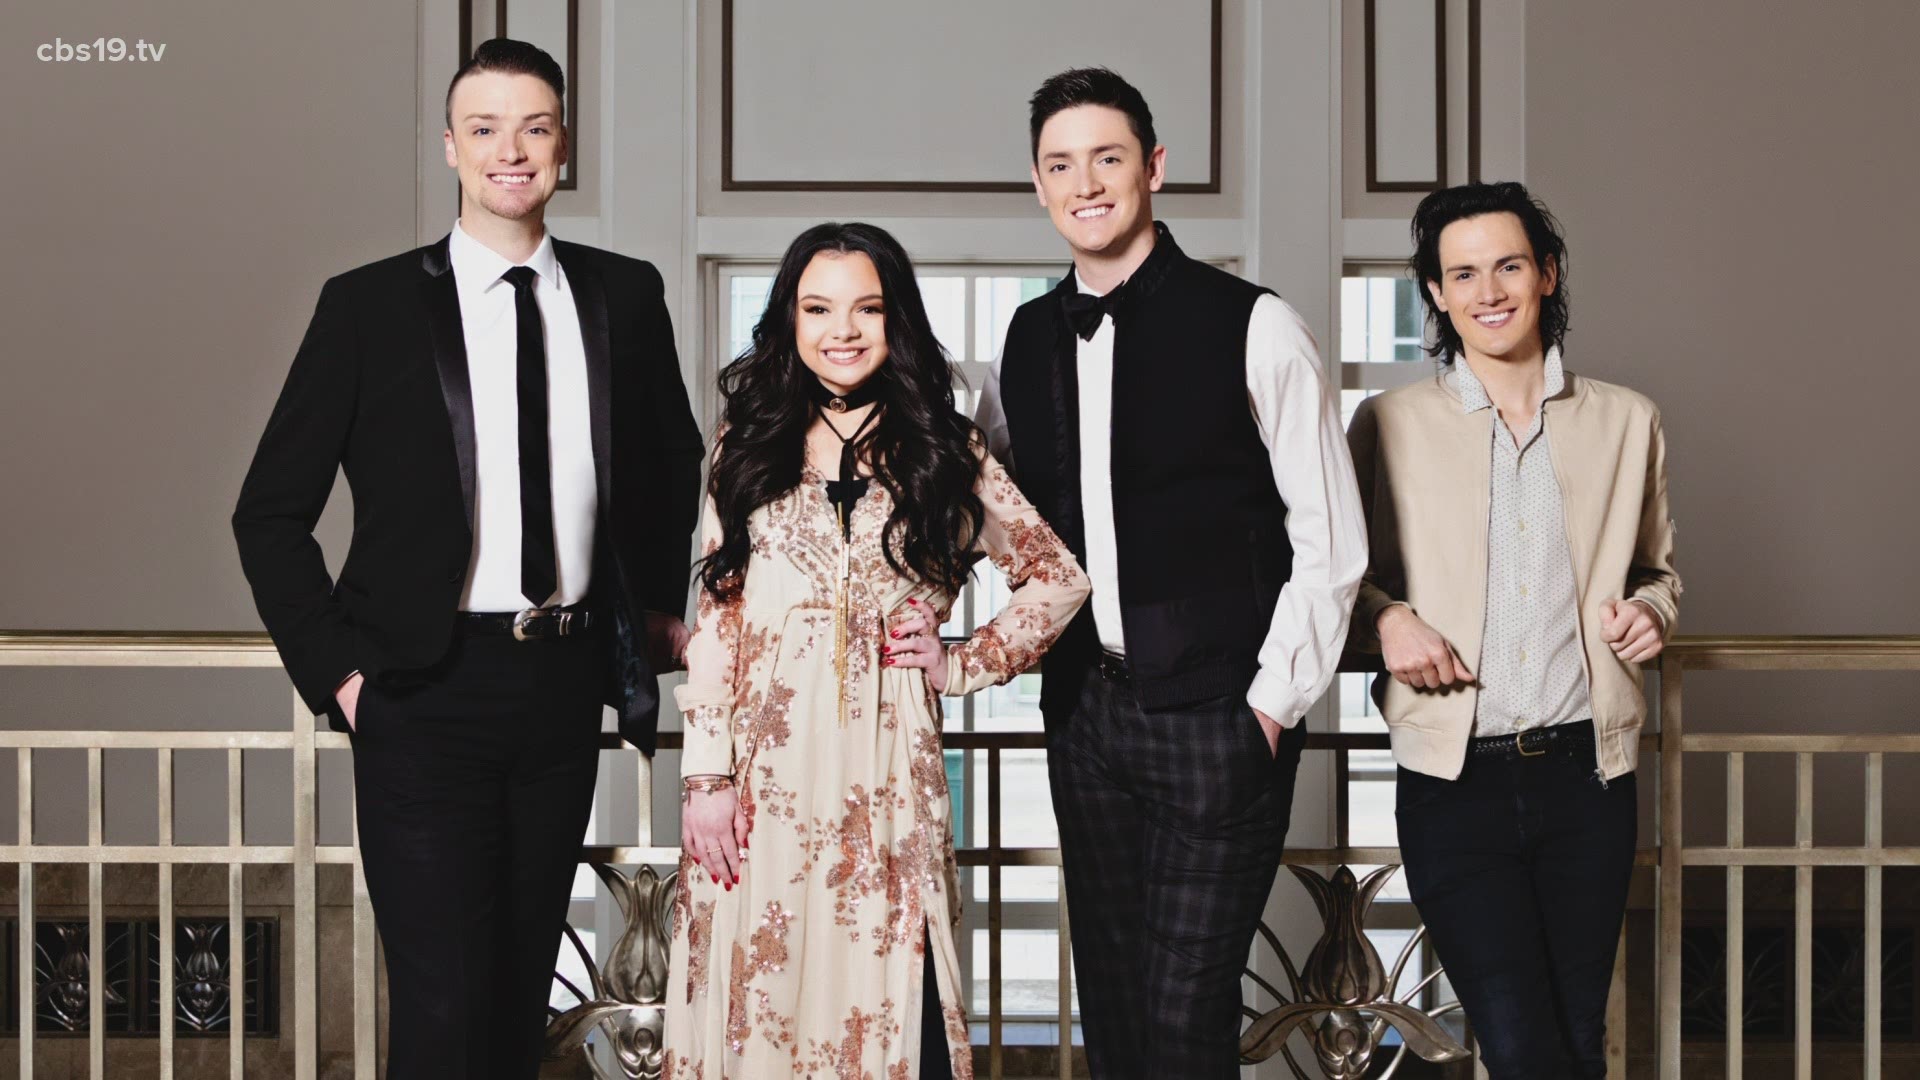 The Erwins are a southern gospel group out of Edgewood, Texas. The band was nominated for a Grammy for their album "What Christmas Really Means."